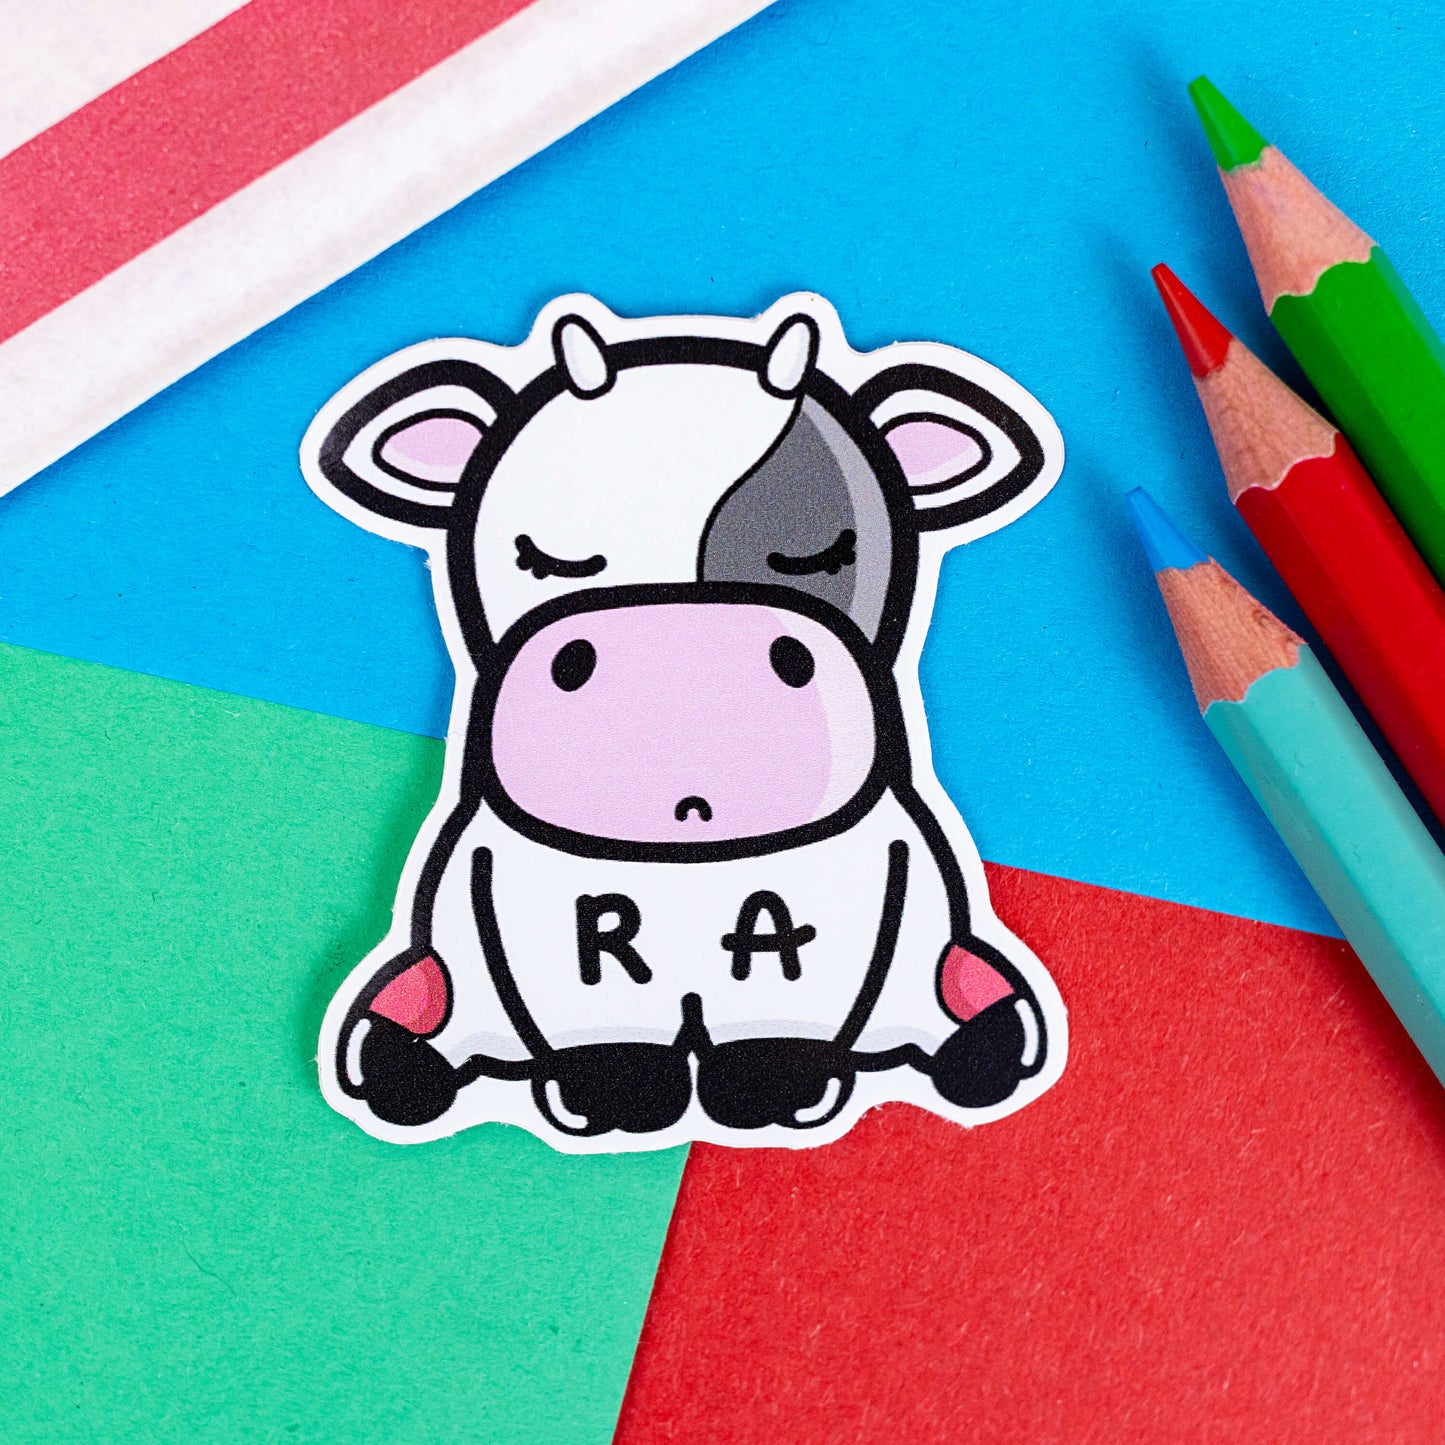 The Moomatoid Arthritis Cow Sticker - Rheumatoid Arthritis on a red, blue and green background with colouring pencils and red stripe candy bag. The sad cow shape sticker has red marks on its lower back legs and the initials R and A across its middle. The hand drawn design is raising awareness for Rheumatoid Arthritis.